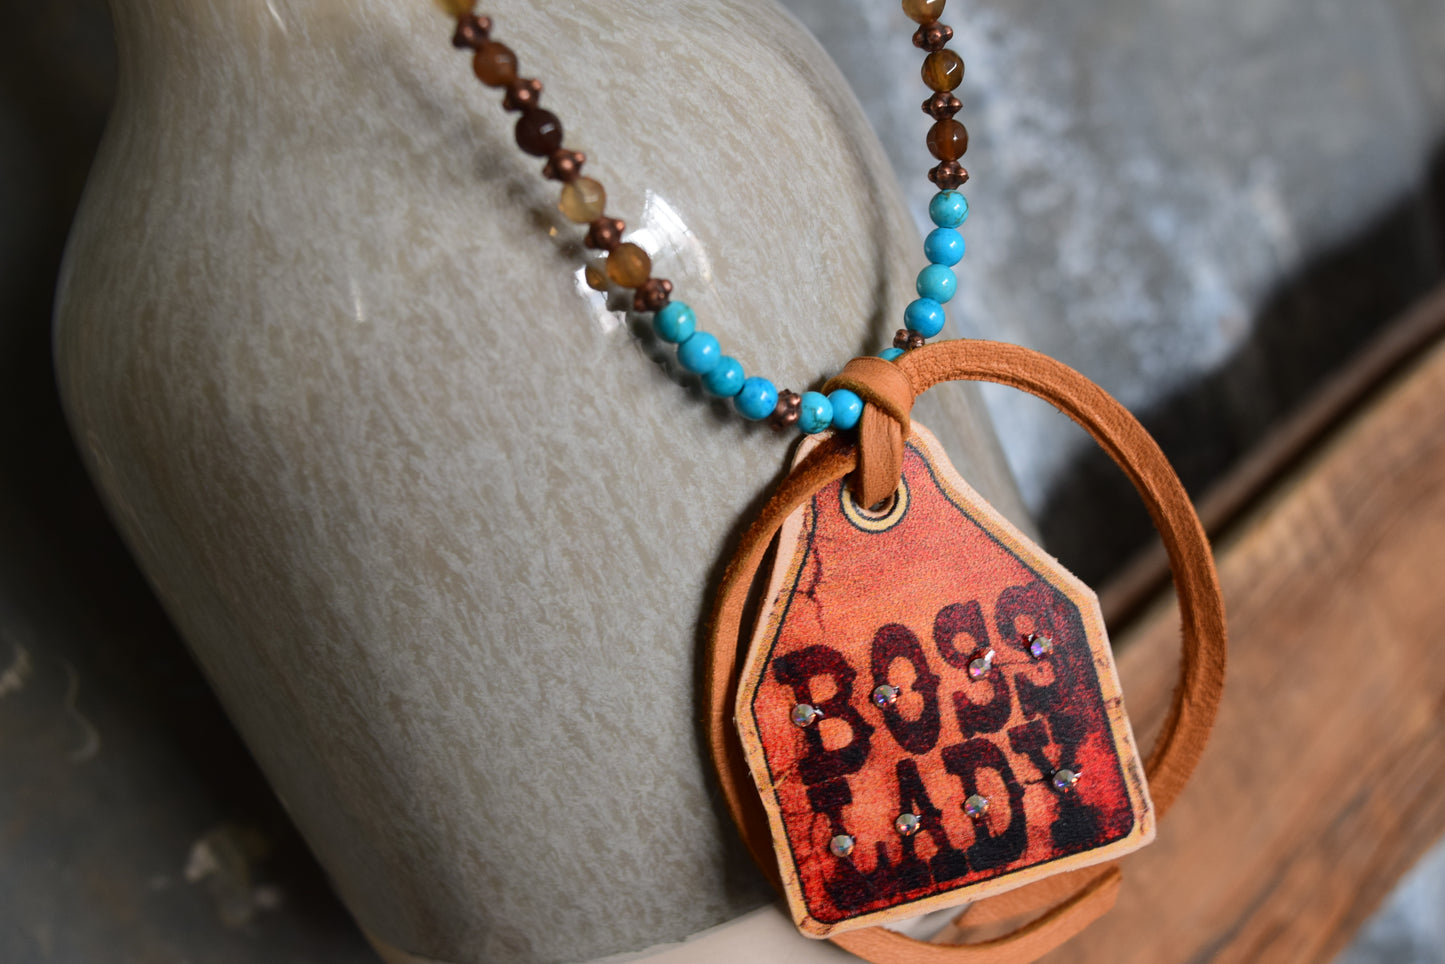 The Boss Lady Necklace